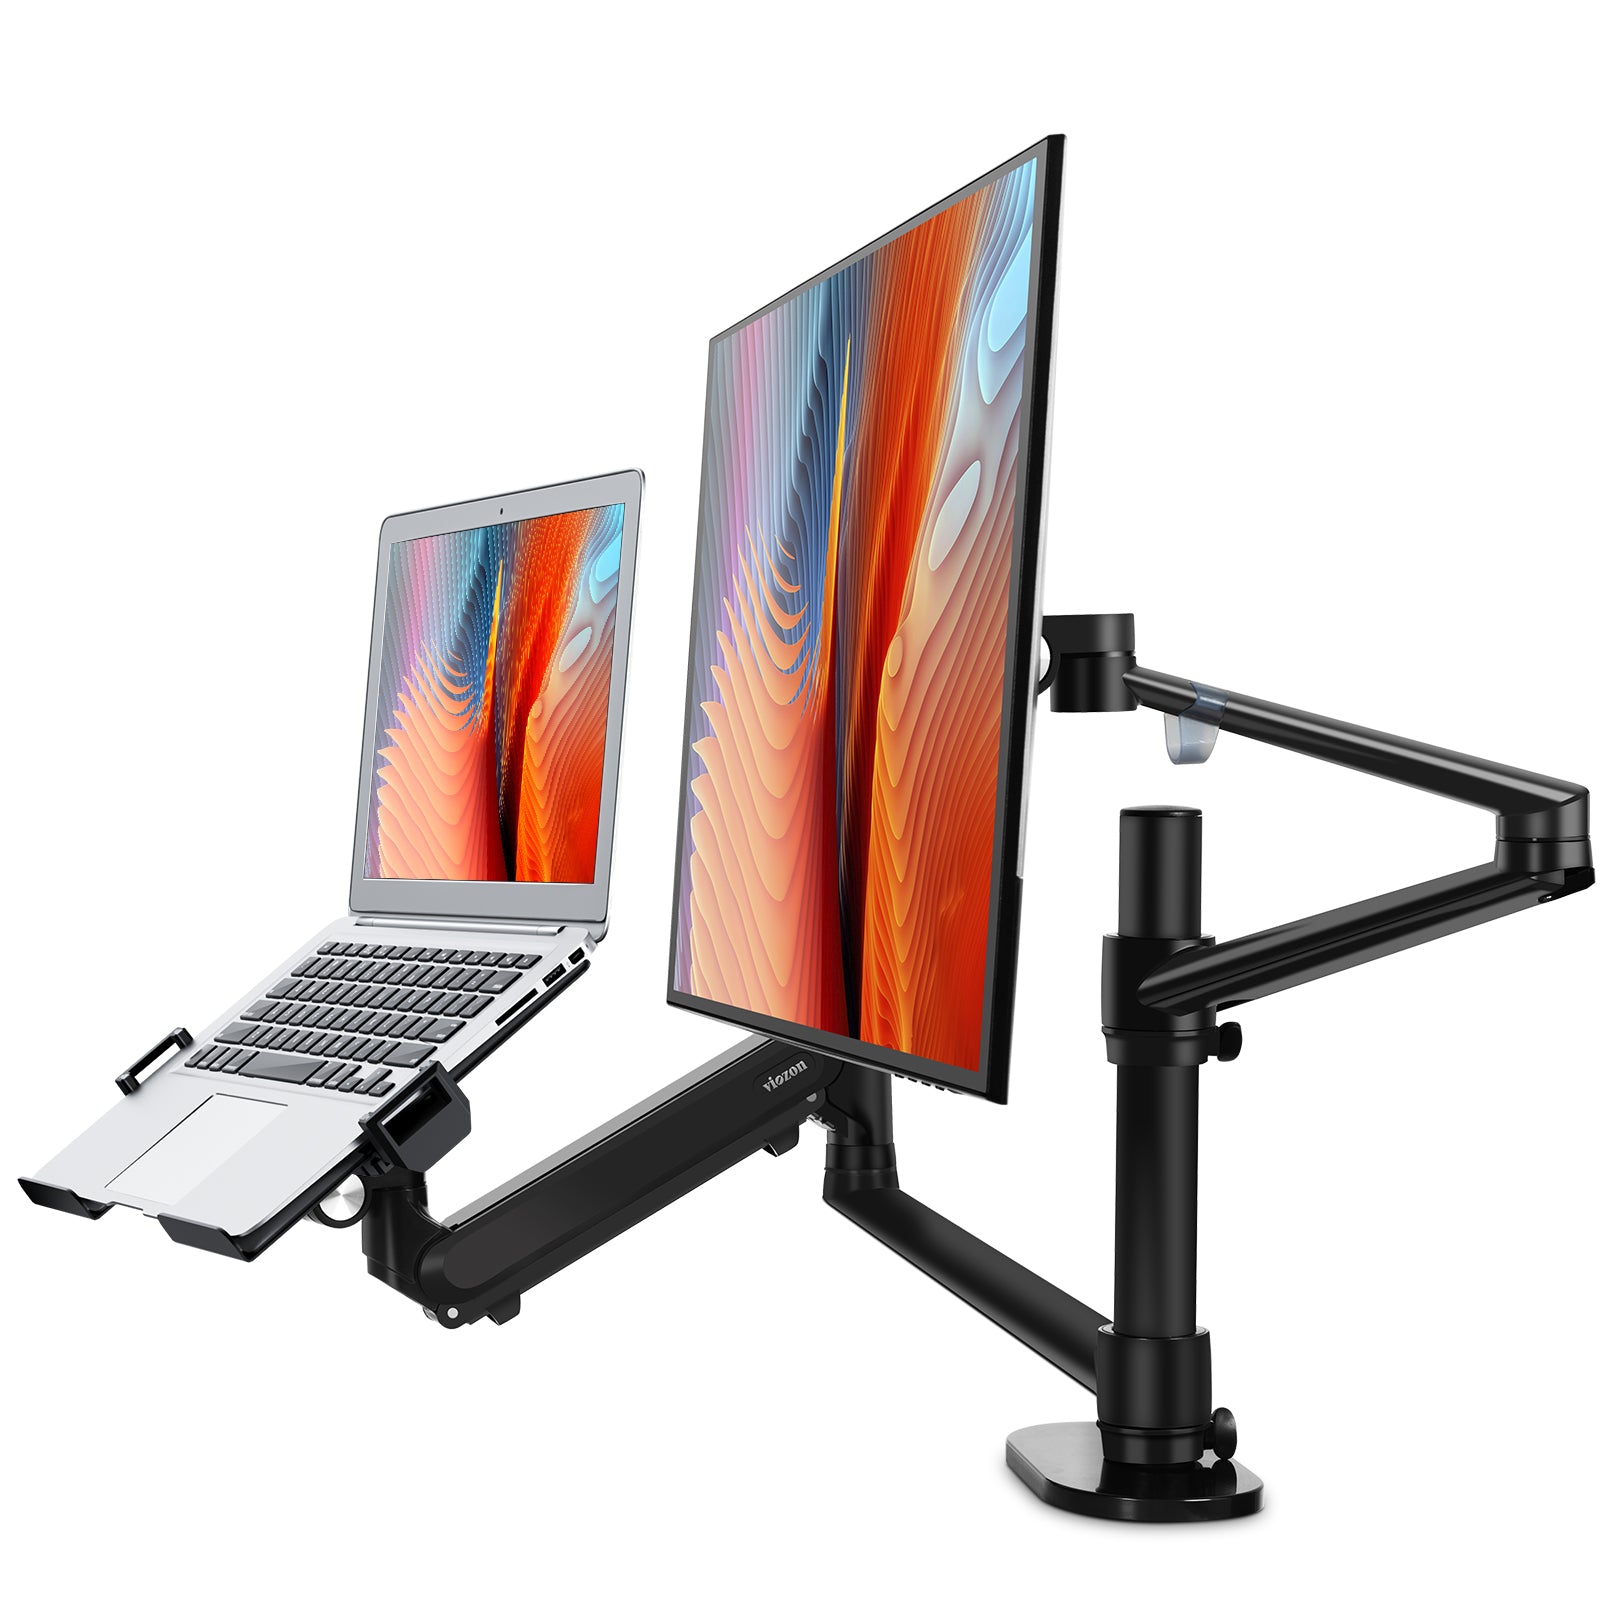 Viozon Monitor and Laptop Mount, 2-in-1 Adjustable Dual Monitor Arm Desk Stand, Single Gas Spring Arm with Laptop Tray for 12-17 Laptop. Single Arm